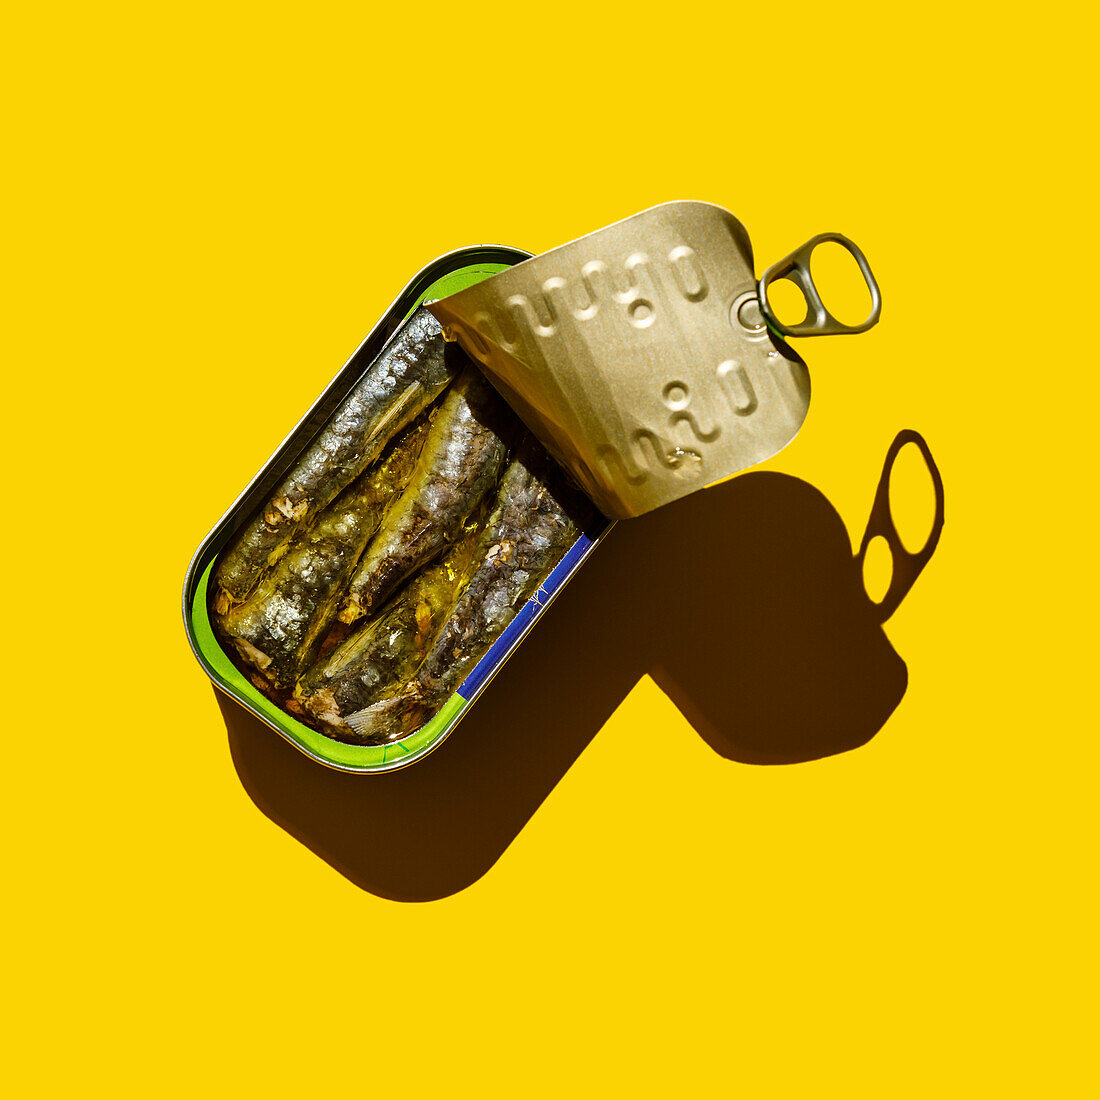 Sardine in tin can on yellow background